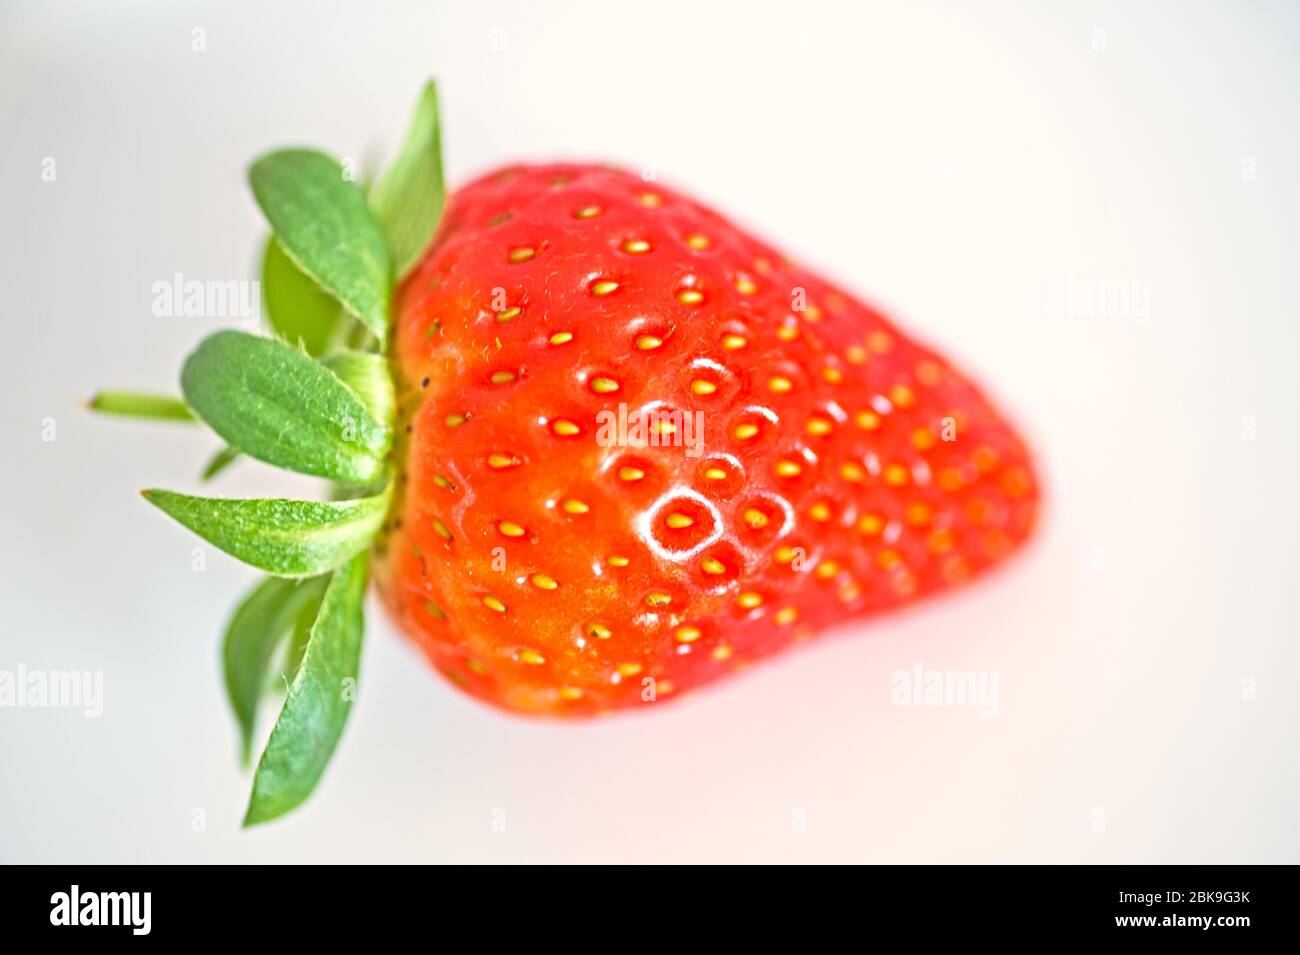 Abstract image of strawberries on a white background Stock Photo